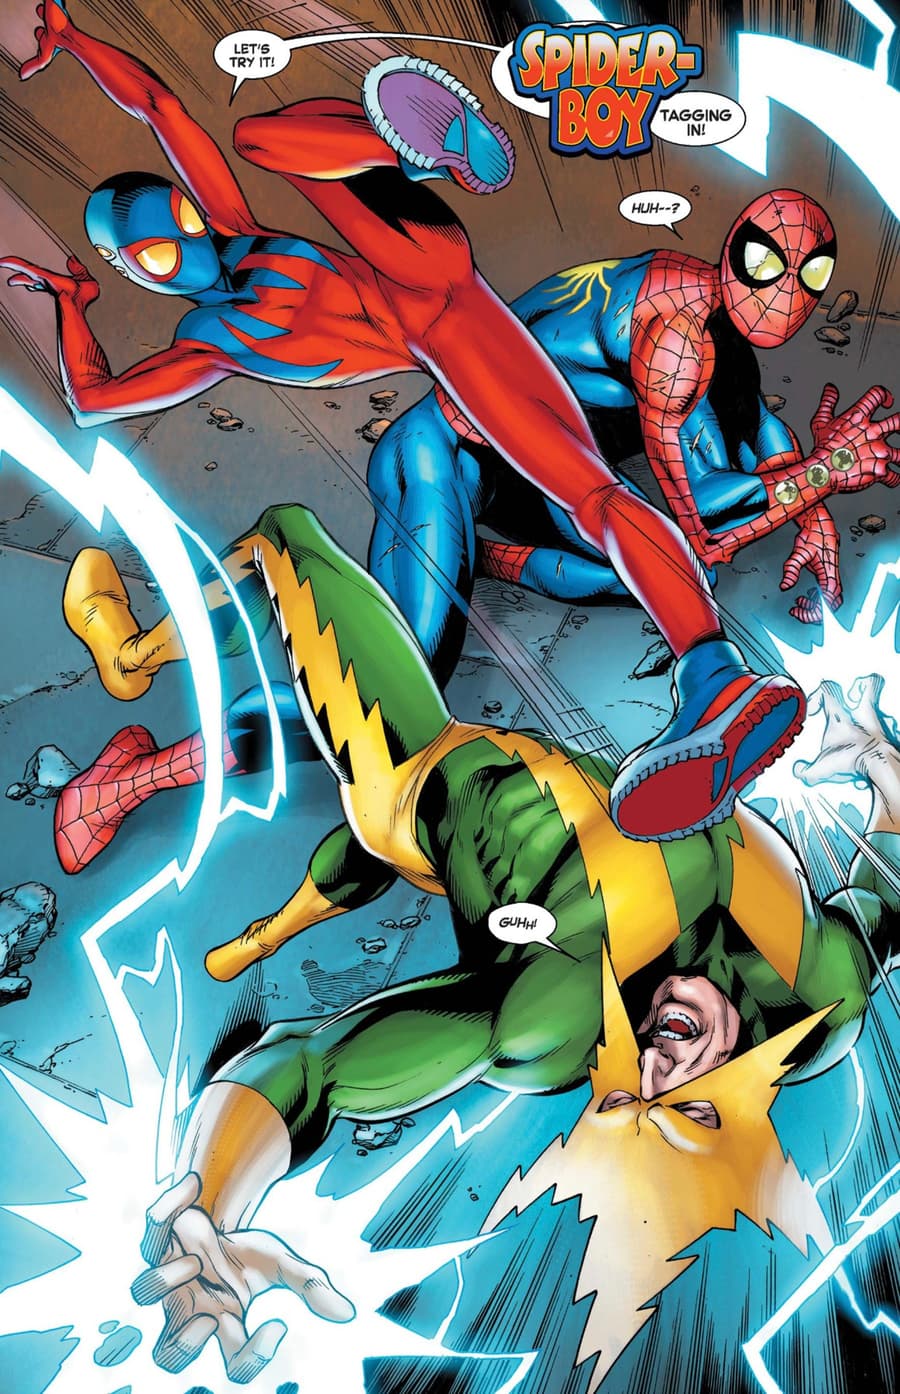 SPIDER-MAN (2022) #10 page by Dan Slott and Mark Bagley